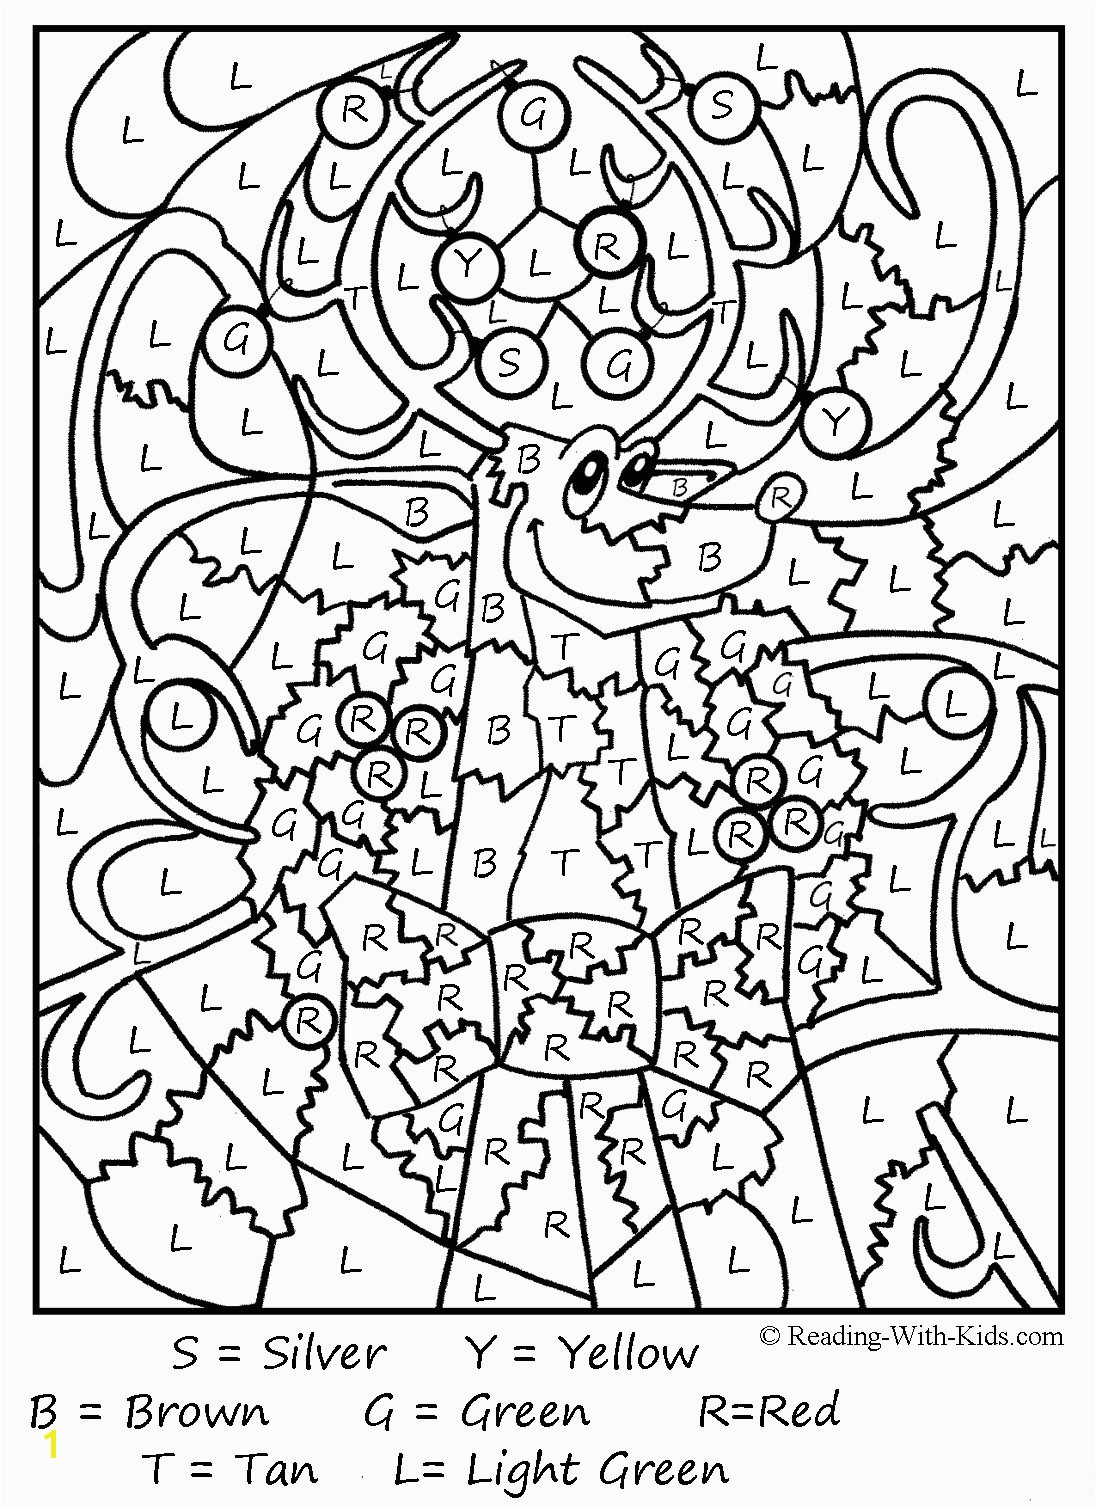 Dover Coloring Pages Printable Illuminated Alphabet Coloring Pages Lovely Illuminated Manuscripts